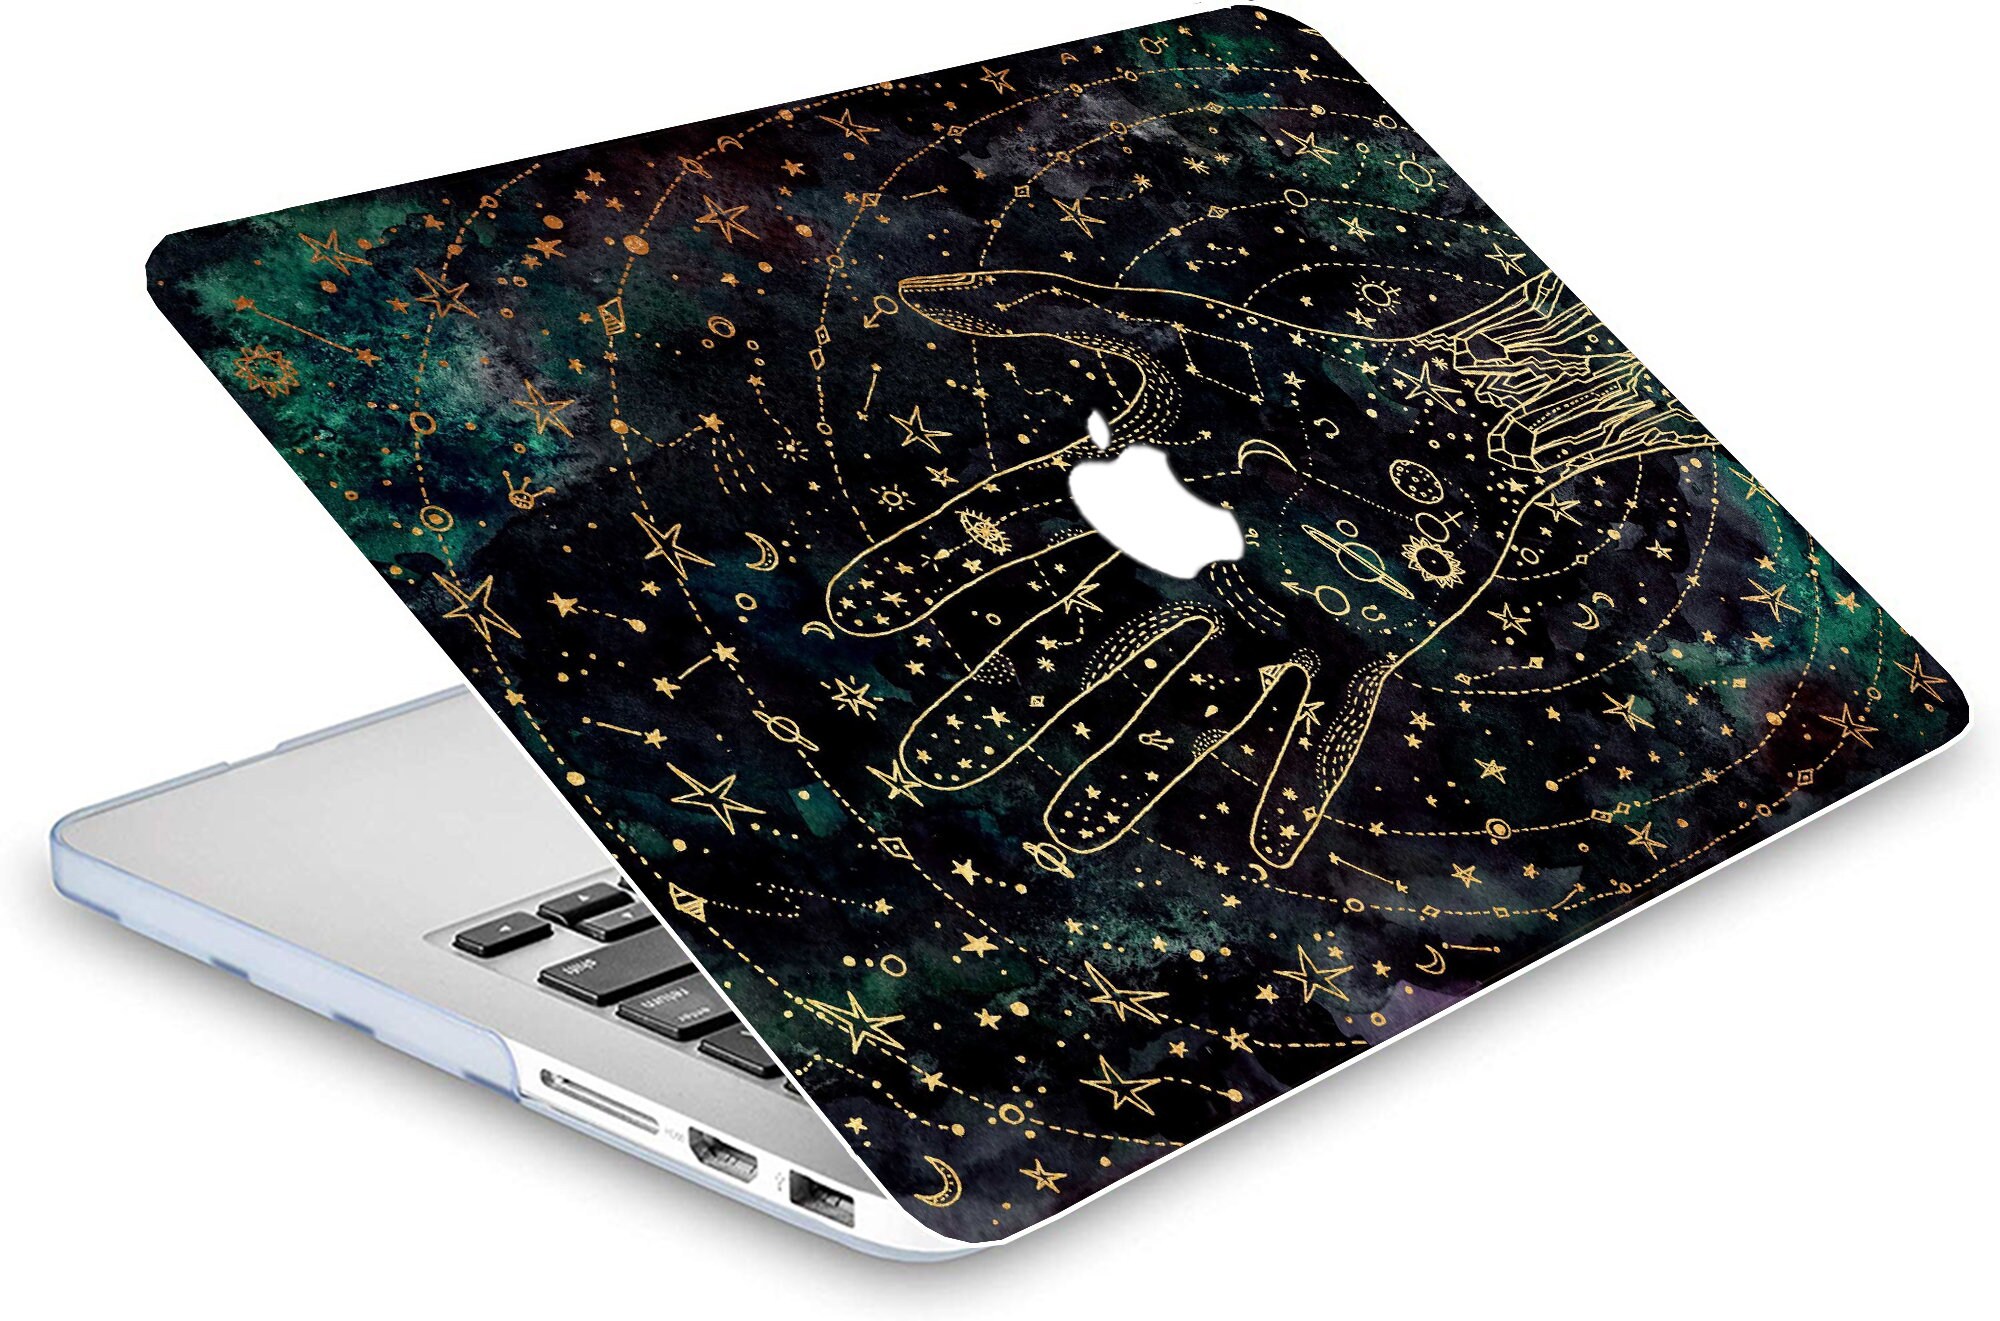 Black Magic Hand Painting Hard Rubberized Laptop Case Celestial Outer Space Stars Cover for Macbook Air Pro 131516 2008-2020+Keyboard Skin